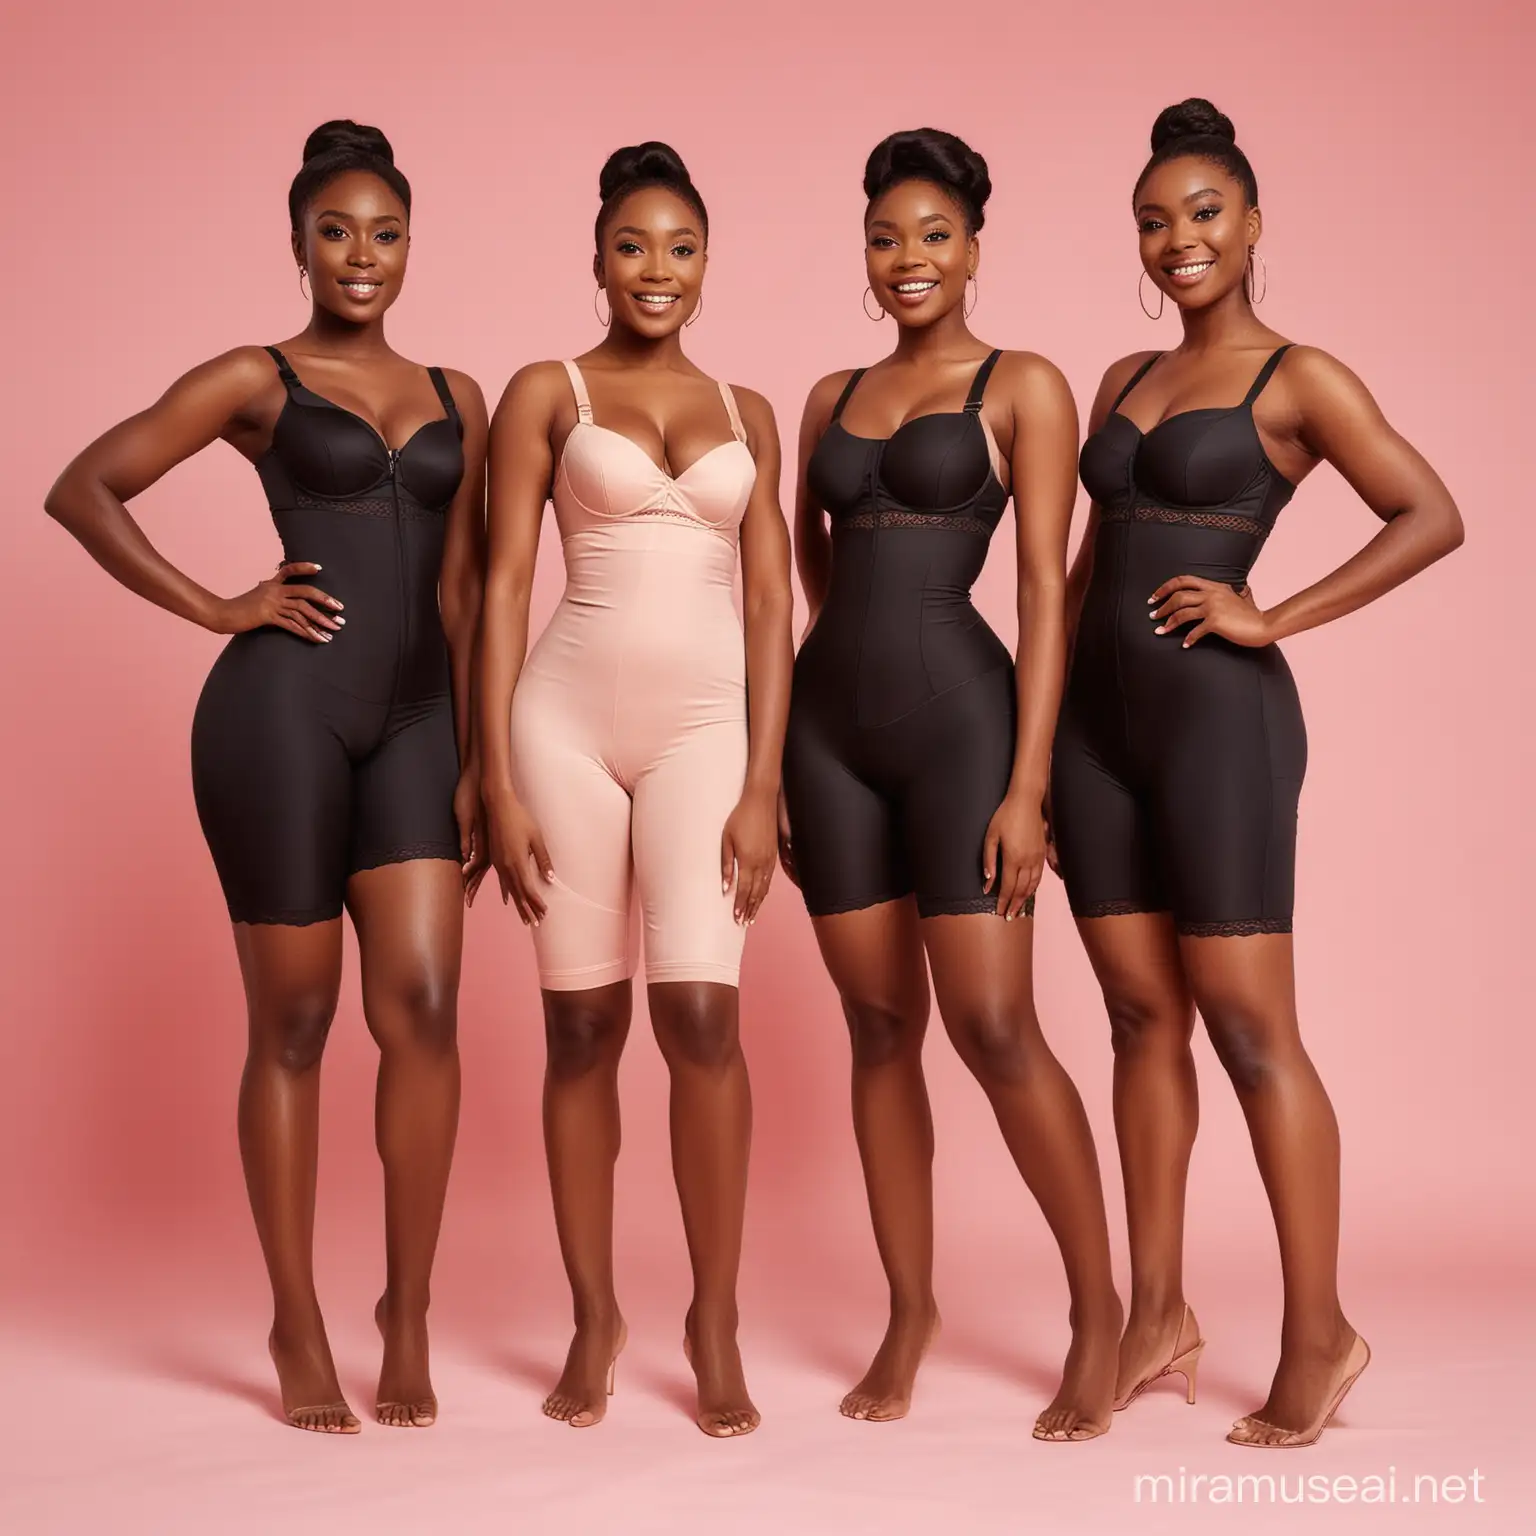 a full body photo of four light complexion nigerian models excitedly dressed in different black coloured faja body shapers on a pink background